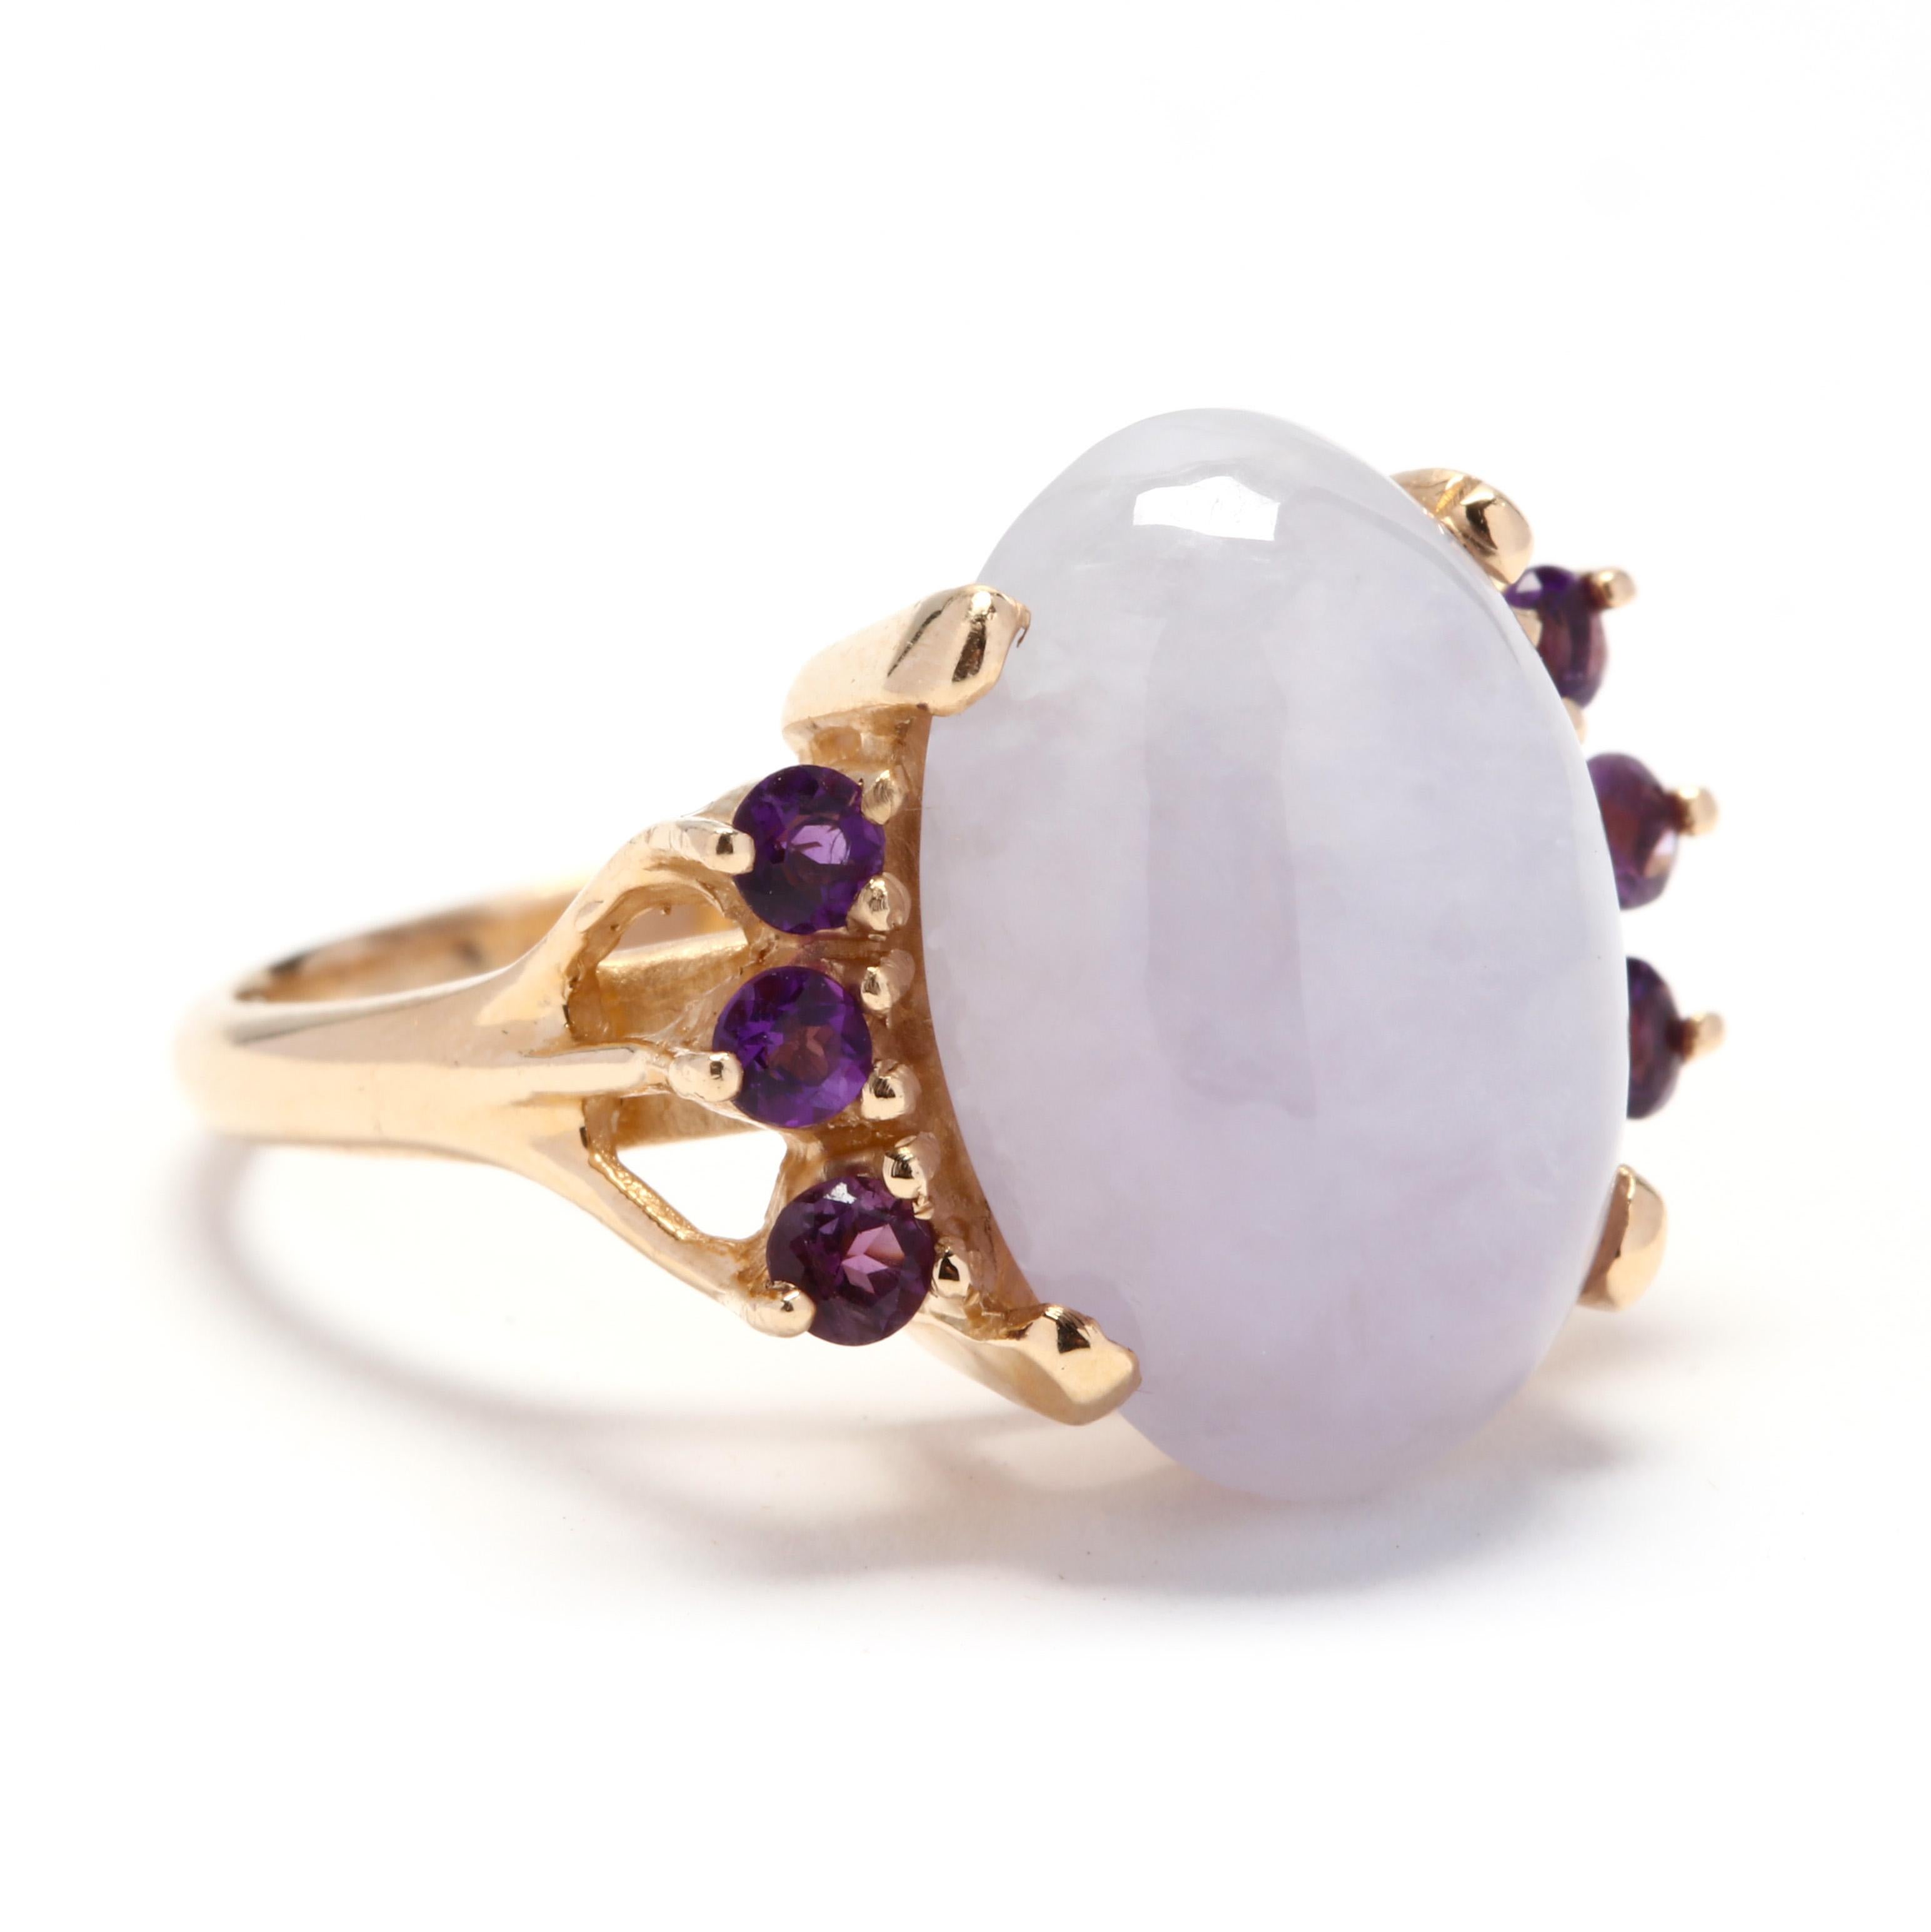 A 14 karat yellow gold, lavender jade, and amethyst cocktail ring. Centered on a prong set, oval cabochon lavender jade stone weighing approximately 11.8 carats with three round cut amethysts on either side and a split shank. A ring fit for a